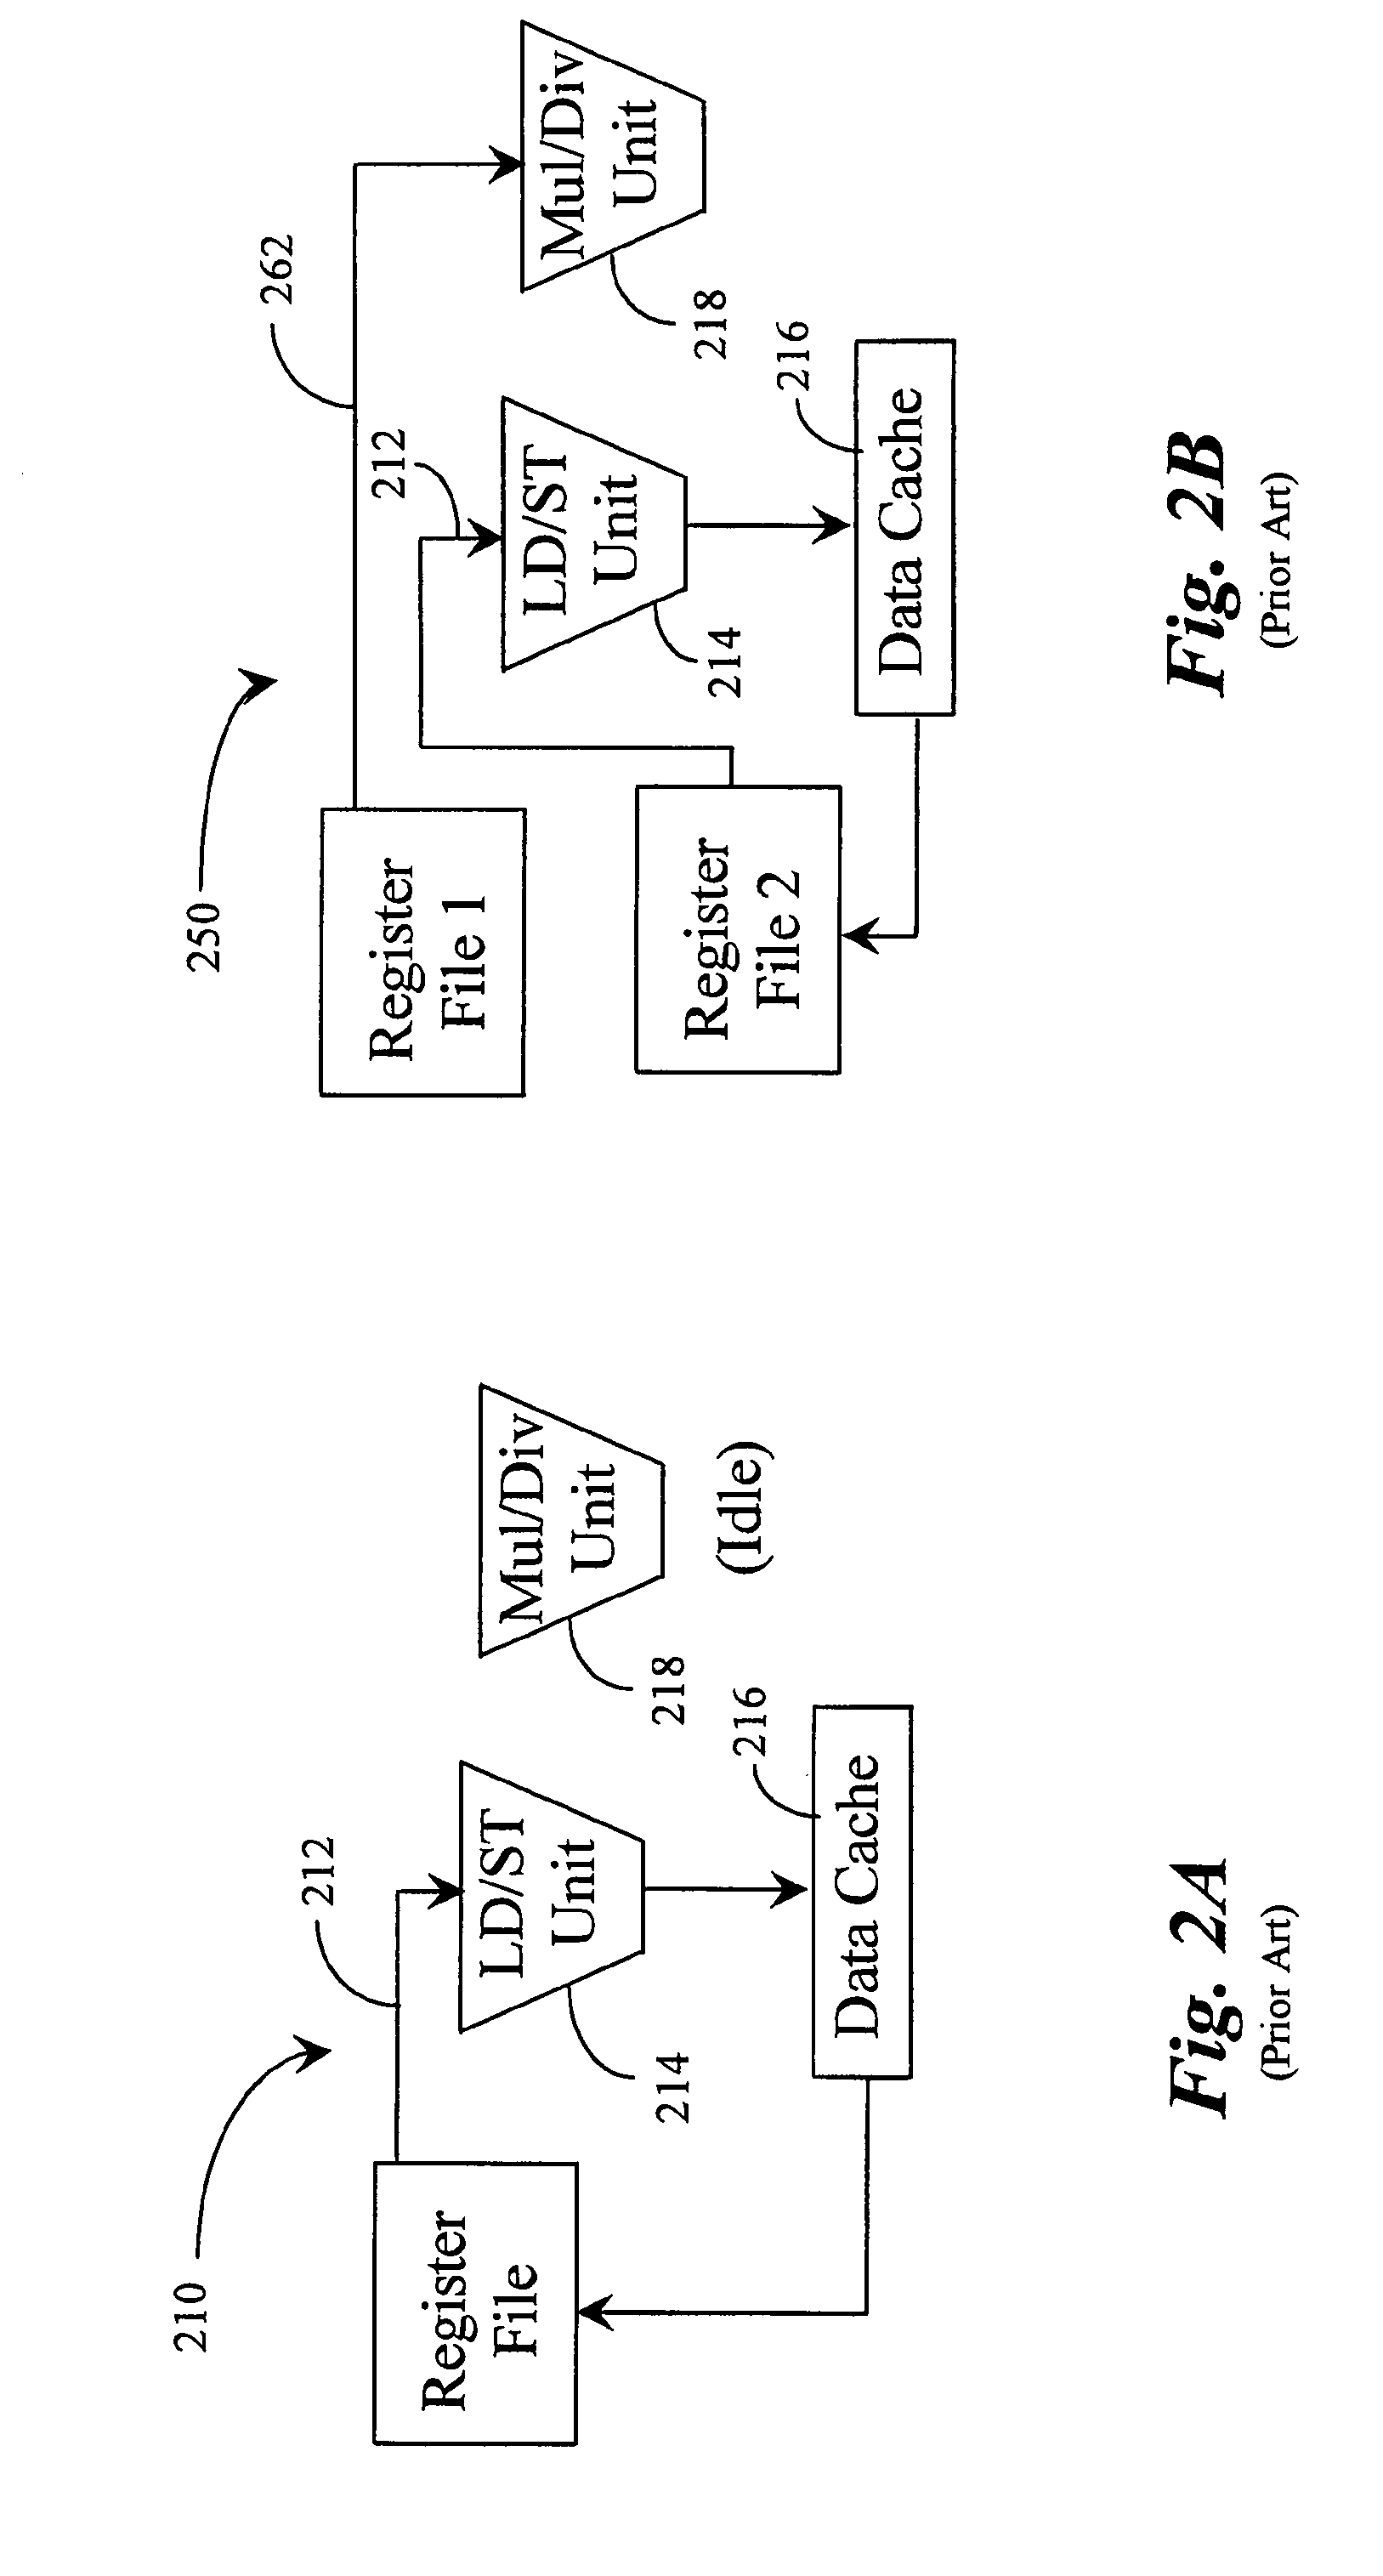 Mechanisms for assuring quality of service for programs executing on a multithreaded processor